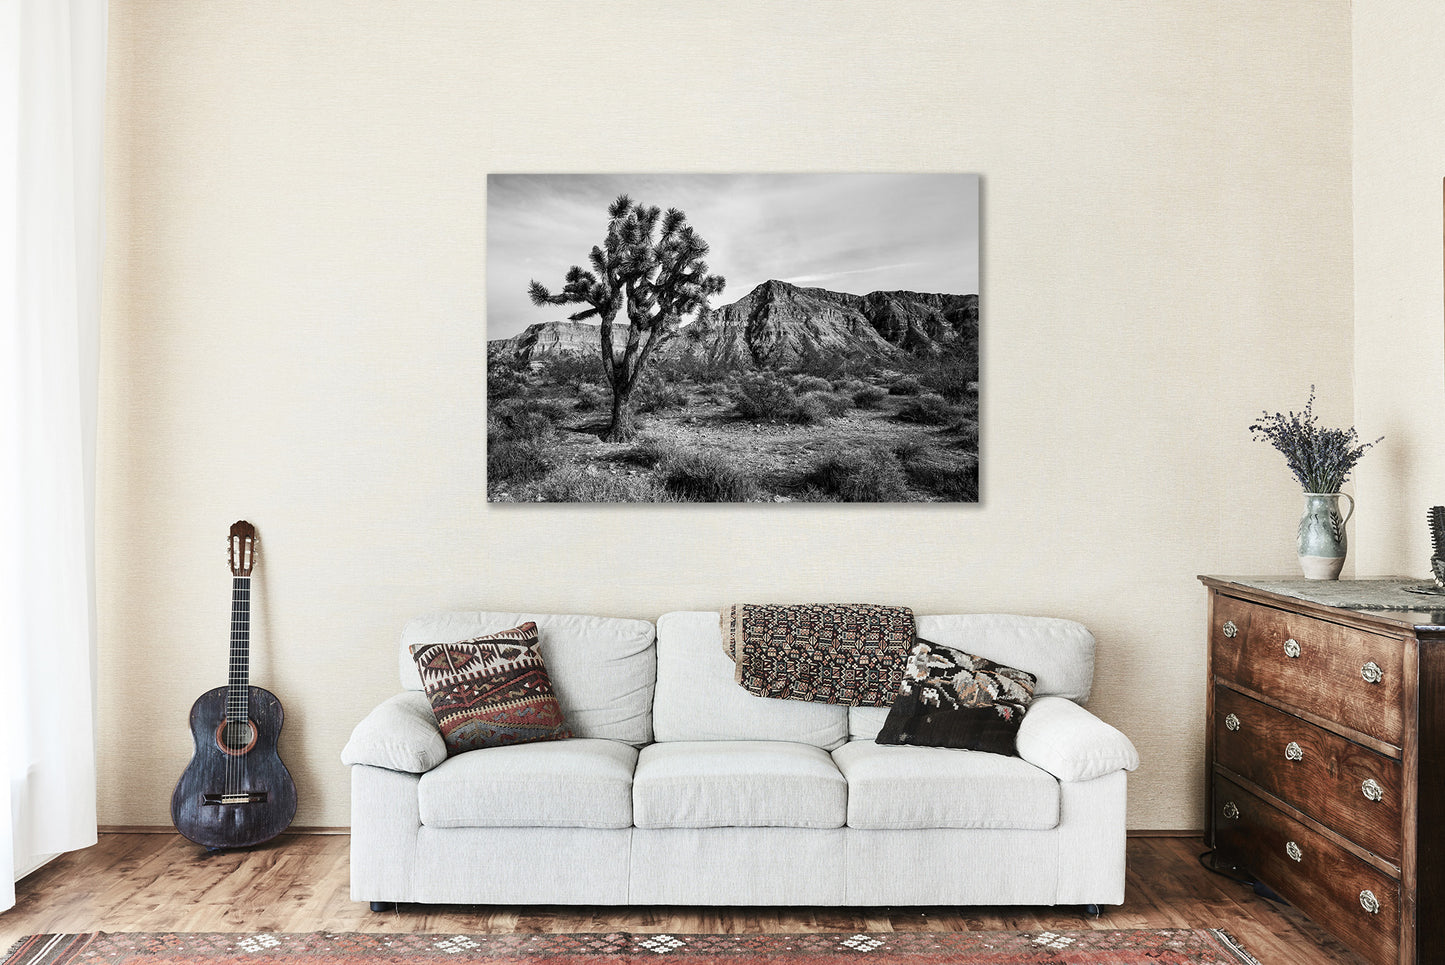 Desert Metal Print - Black and White Picture of Joshua Tree and Mountain in Arizona - Ready to Hang Southwest Landscape Wall Art Decor